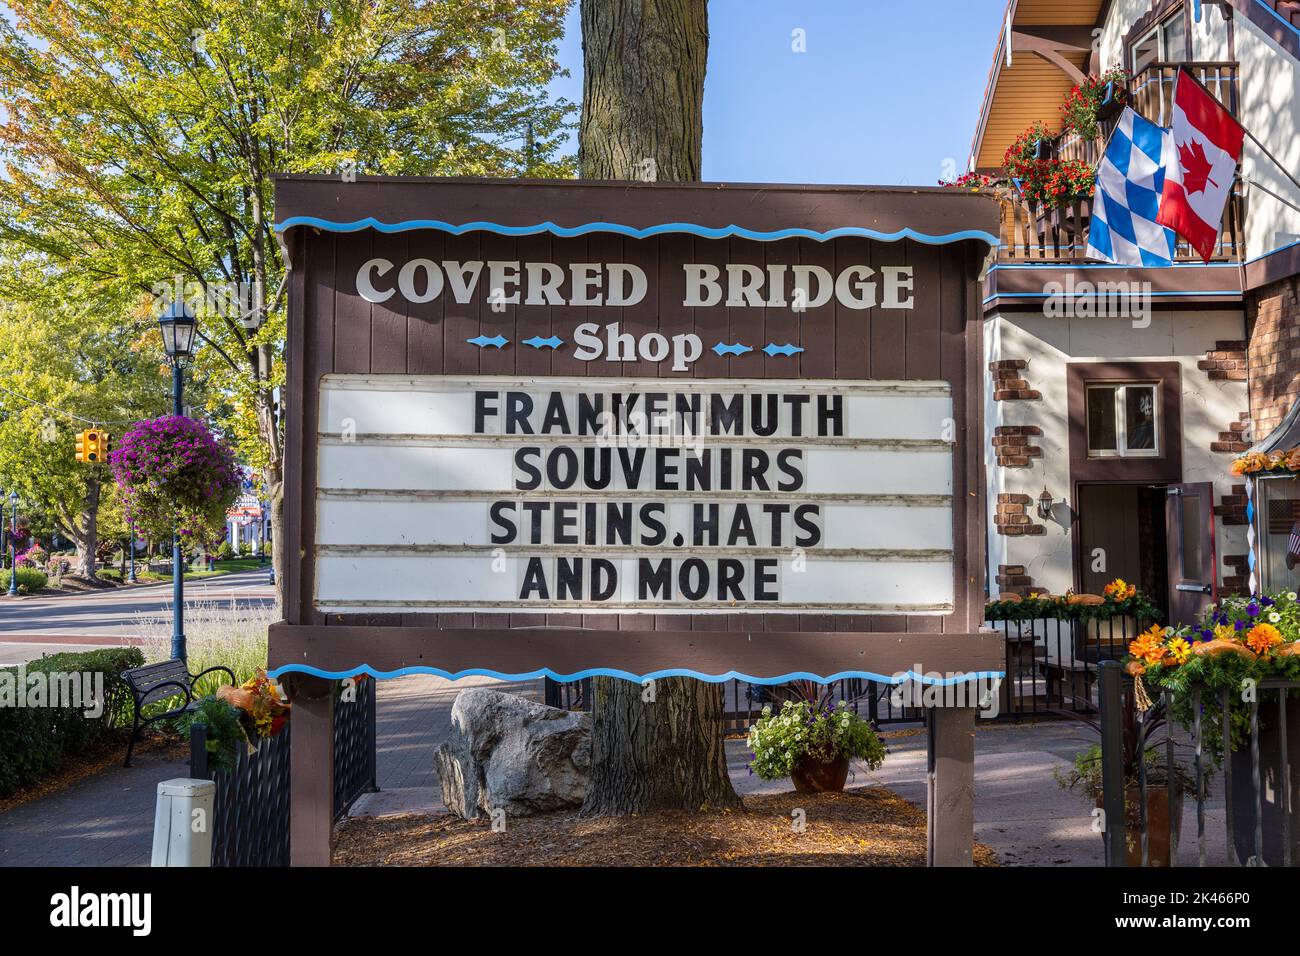 Frankenmuth Covered Bridge Shop Sign Selling Tourist Souvenirs In Frankenmuth Michigan USA Stock Photo